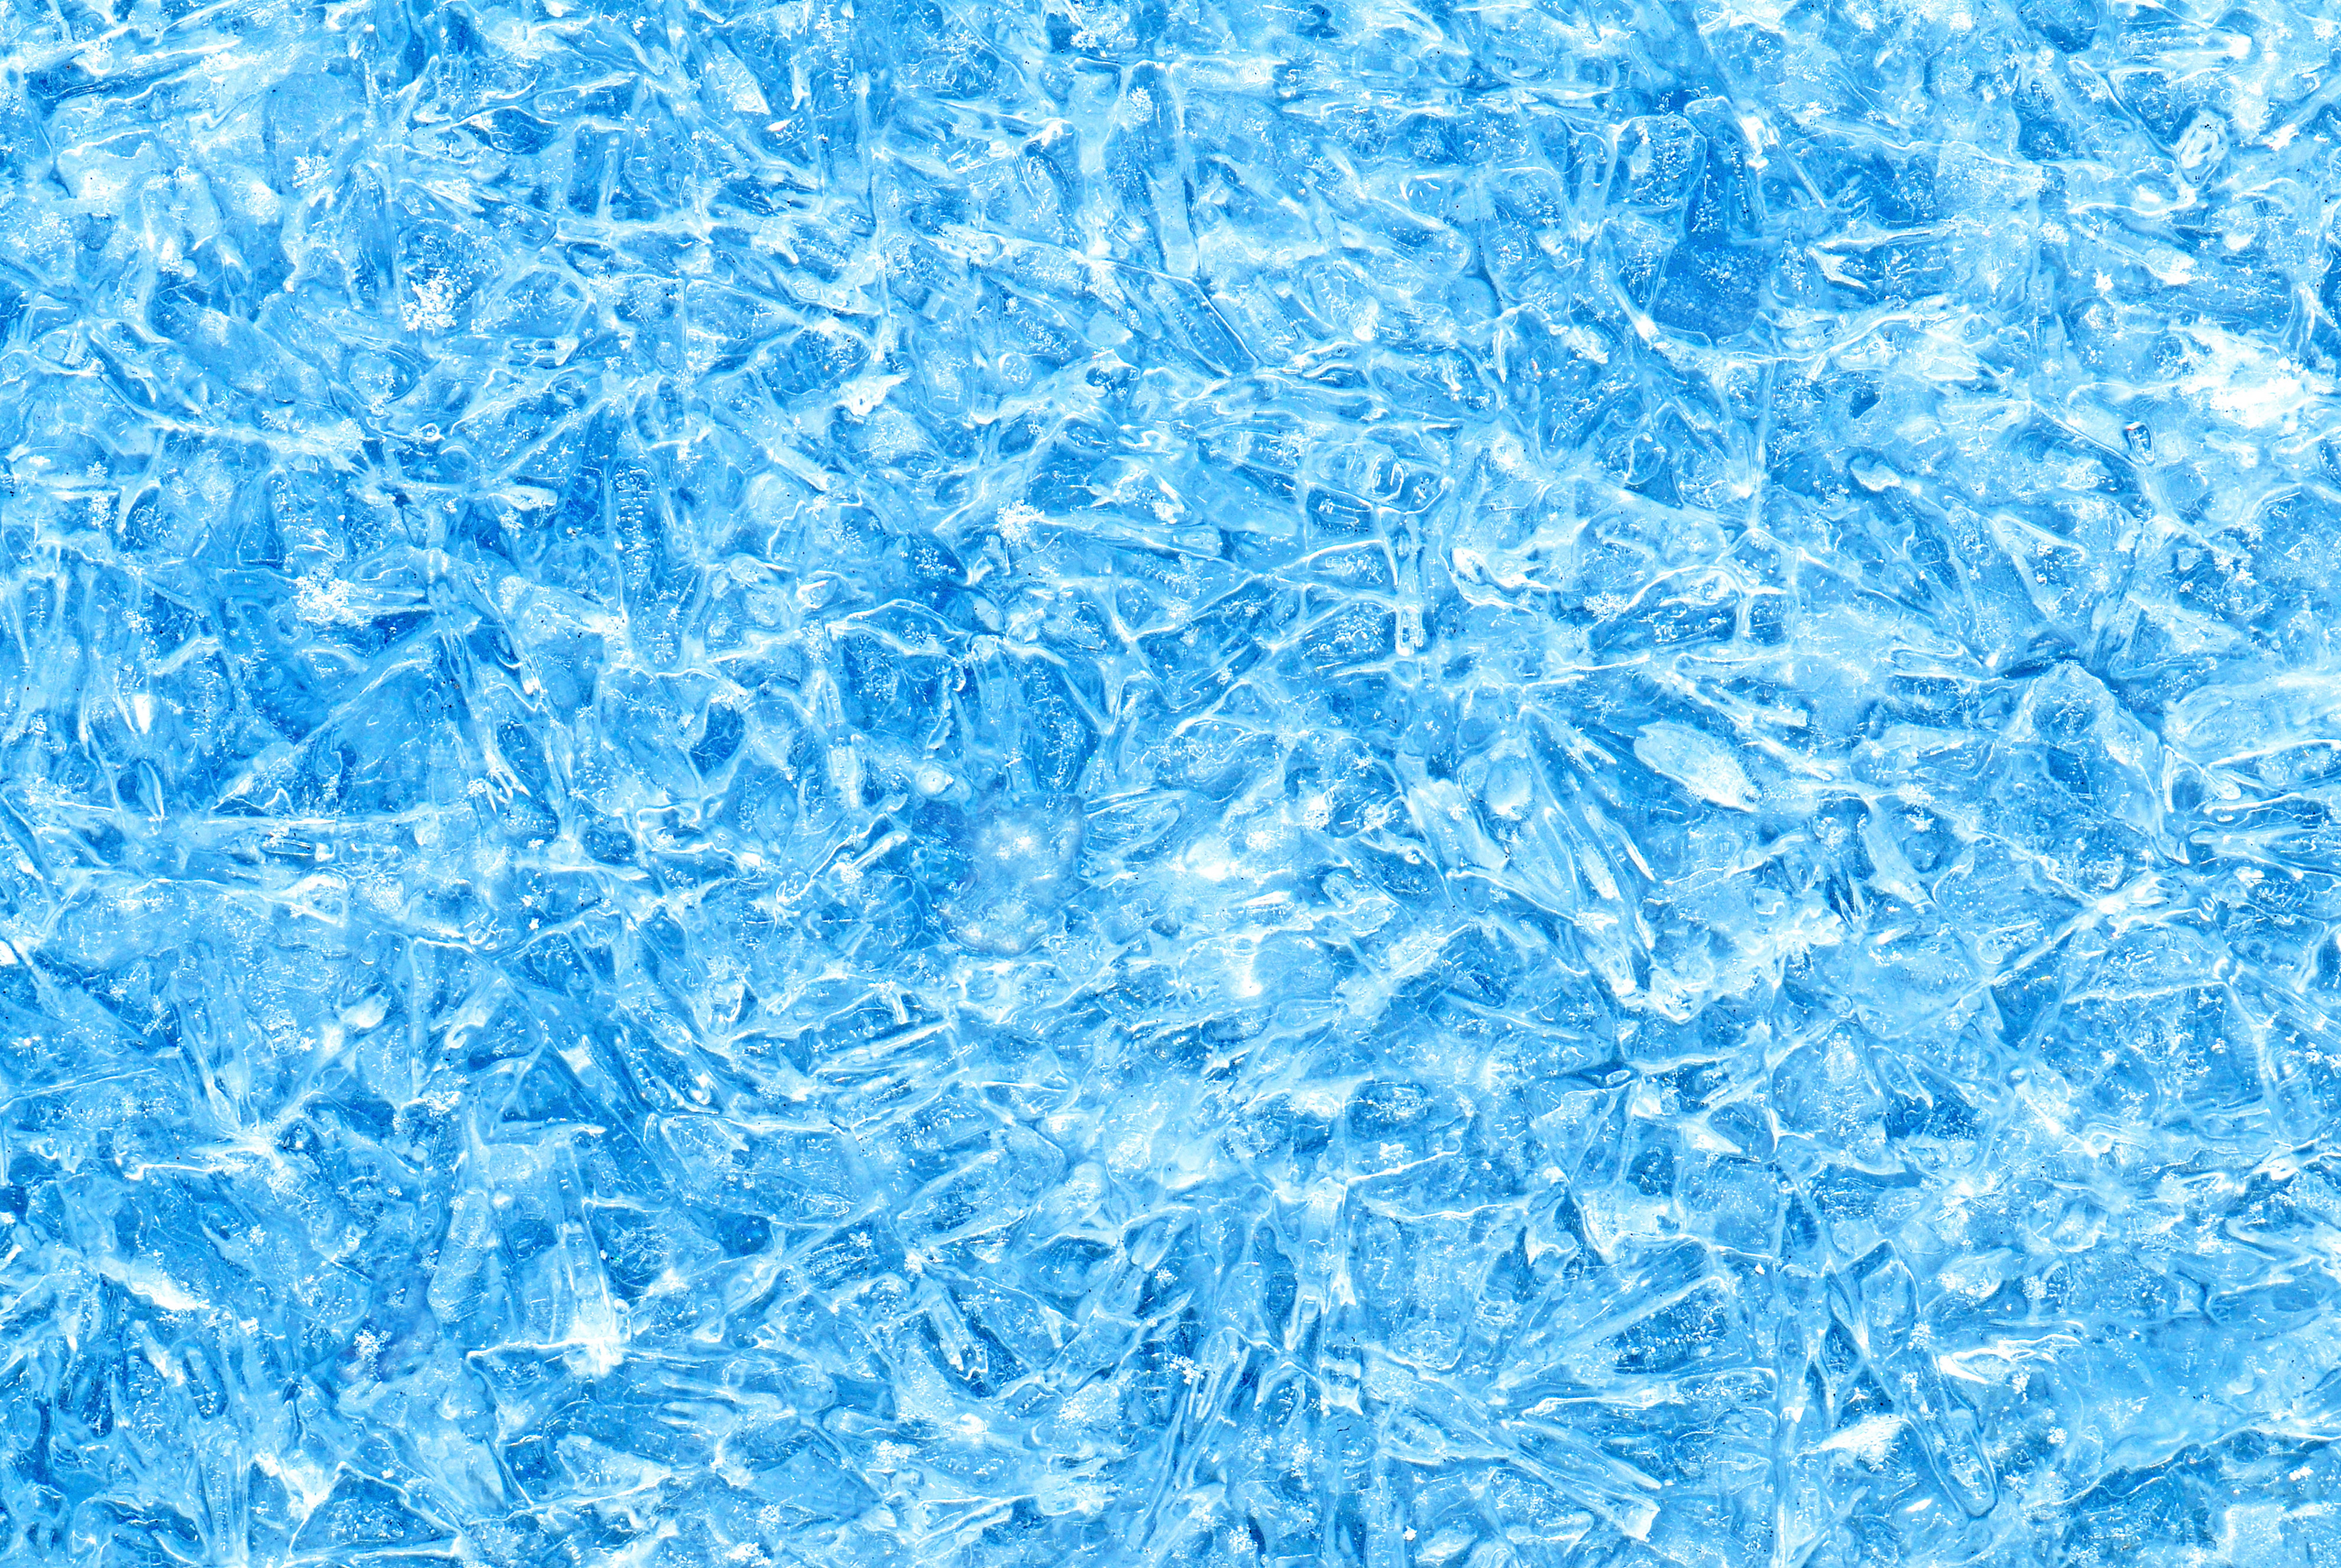 30 Ice Texture Backgrounds for Web Designers Tech Lovers l Web 3960x2653